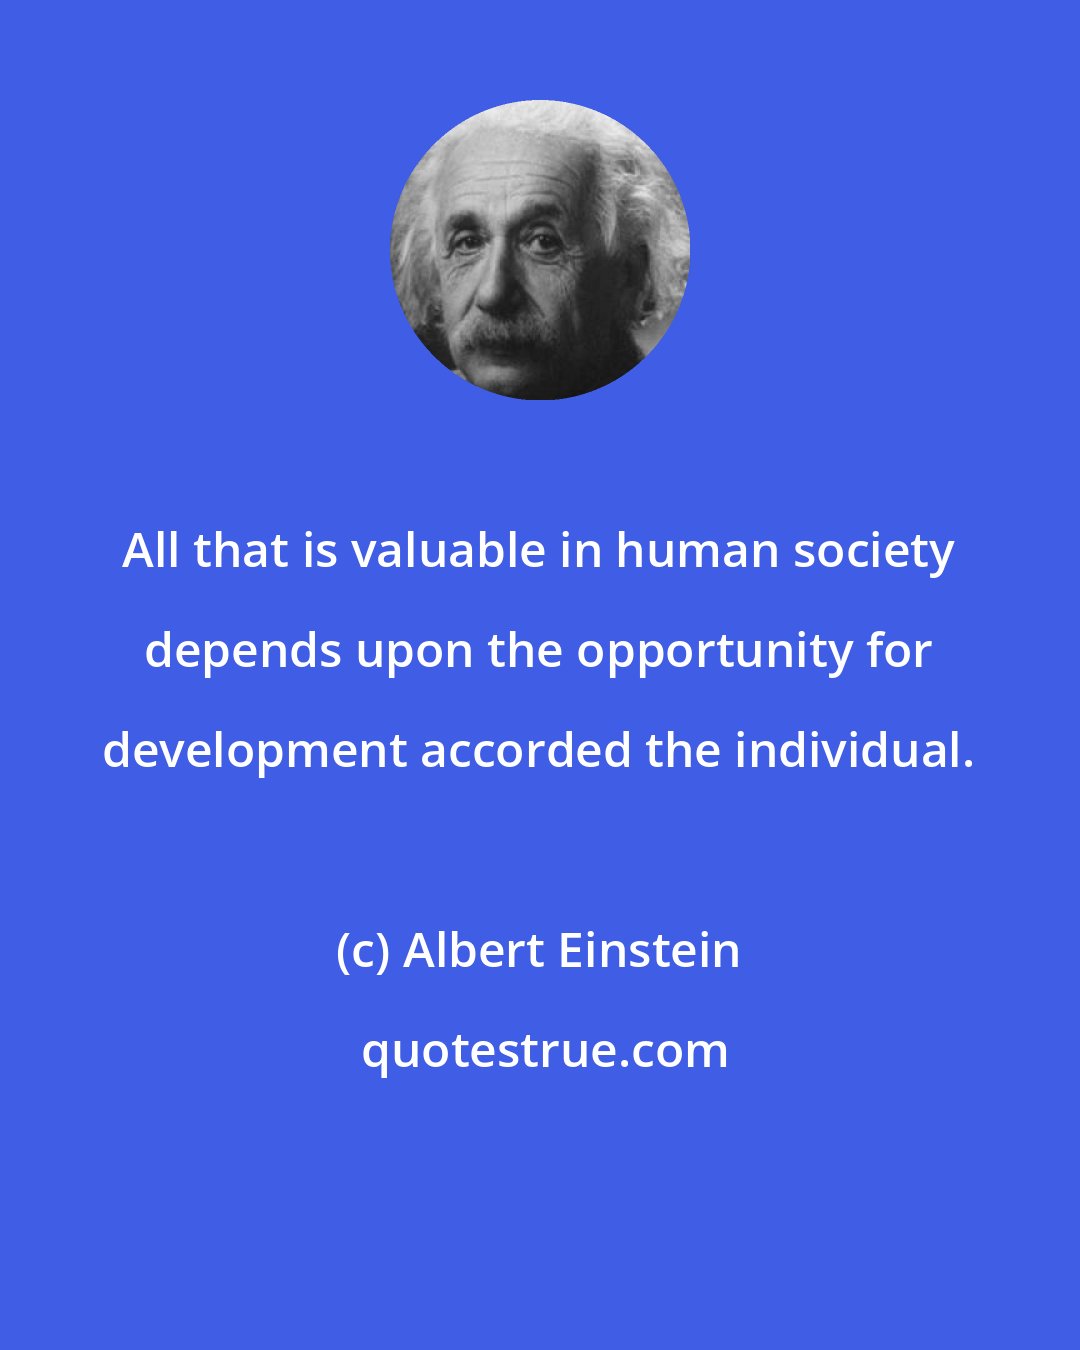 Albert Einstein: All that is valuable in human society depends upon the opportunity for development accorded the individual.